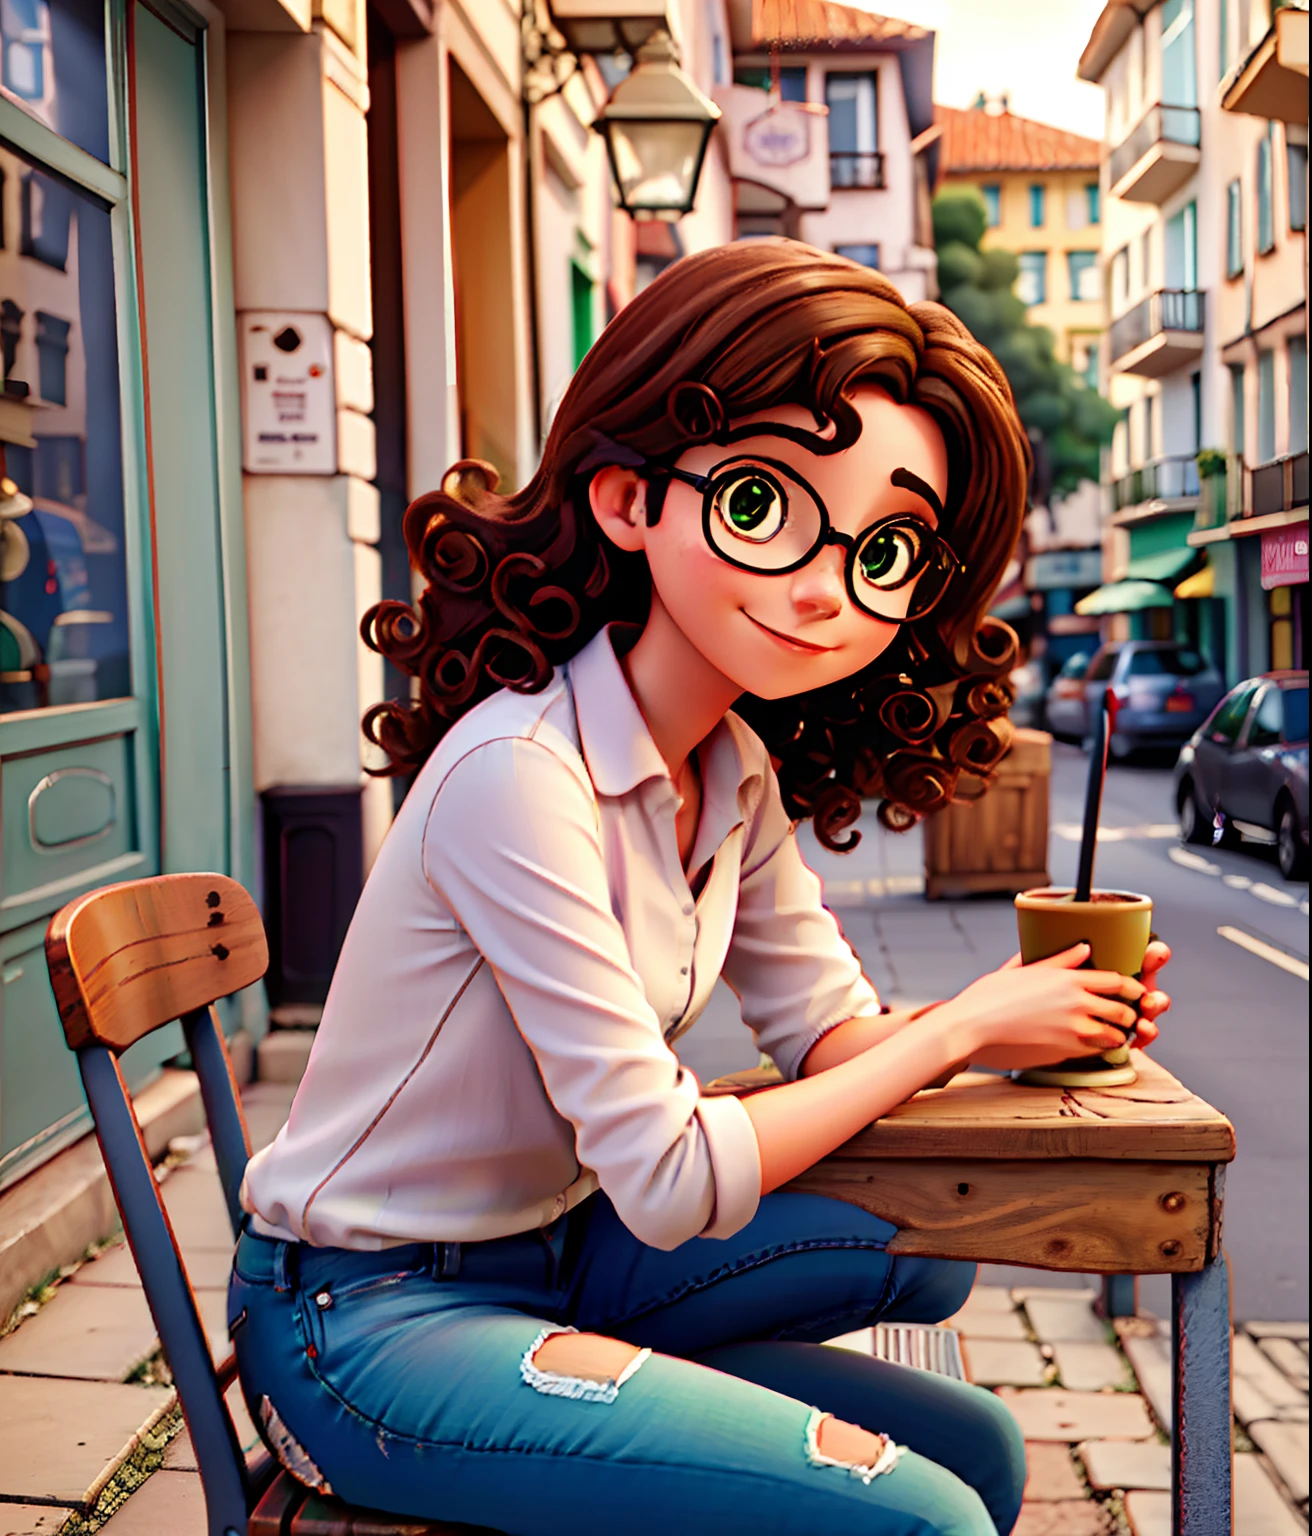 Beautiful Brazilian woman sitting and drinking coffee outside on the side of the street in a small café, beautiful face, Shoulder-length curly brown hair with green eyes and glasses, Wearing jeans and a black polo shirt, grande estilo de moda, looking at you with loving eyes and a soft smile, Background is a European city of the city center, fundo desfocado, profundidade de campo rasa, Cinematic light, luz suave, retroiluminado, micro-detalhes, renderizado, fotorrealista, cinemactic, 85mm 1.4